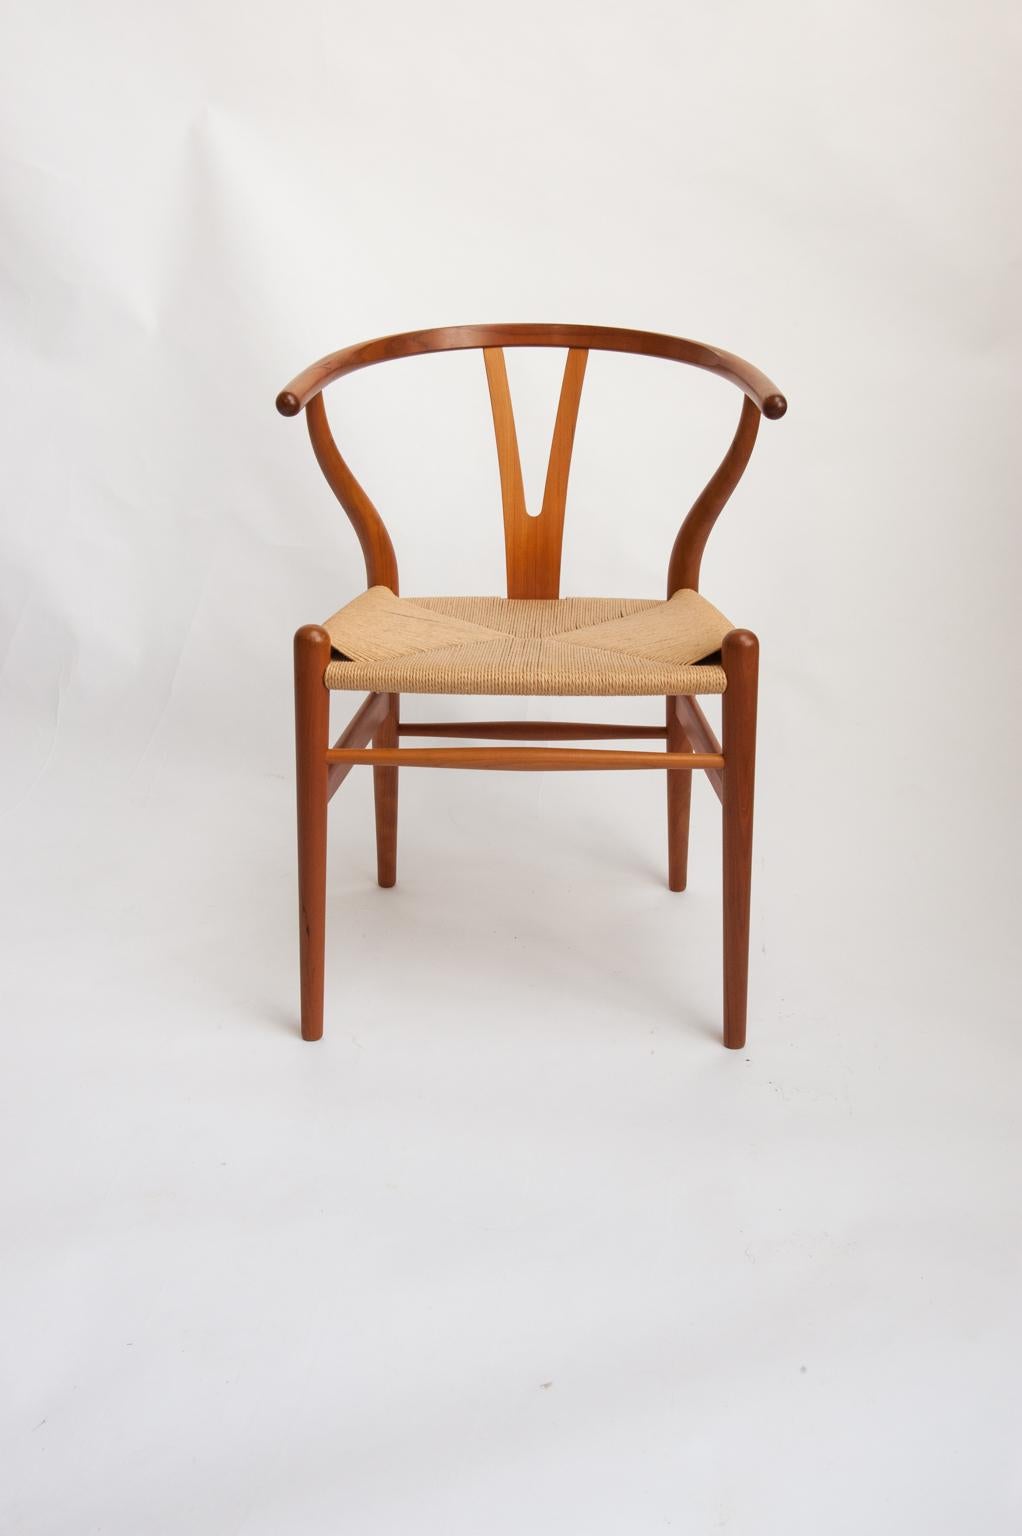 The beautiful Y-Chair or Wishbone chair, model CH 24, was designed in 1950, and has become Wegners best selling chair. The chair has its roots in the orient, and is light and elegant with very good sitting comfort. 
This close to perfect set of